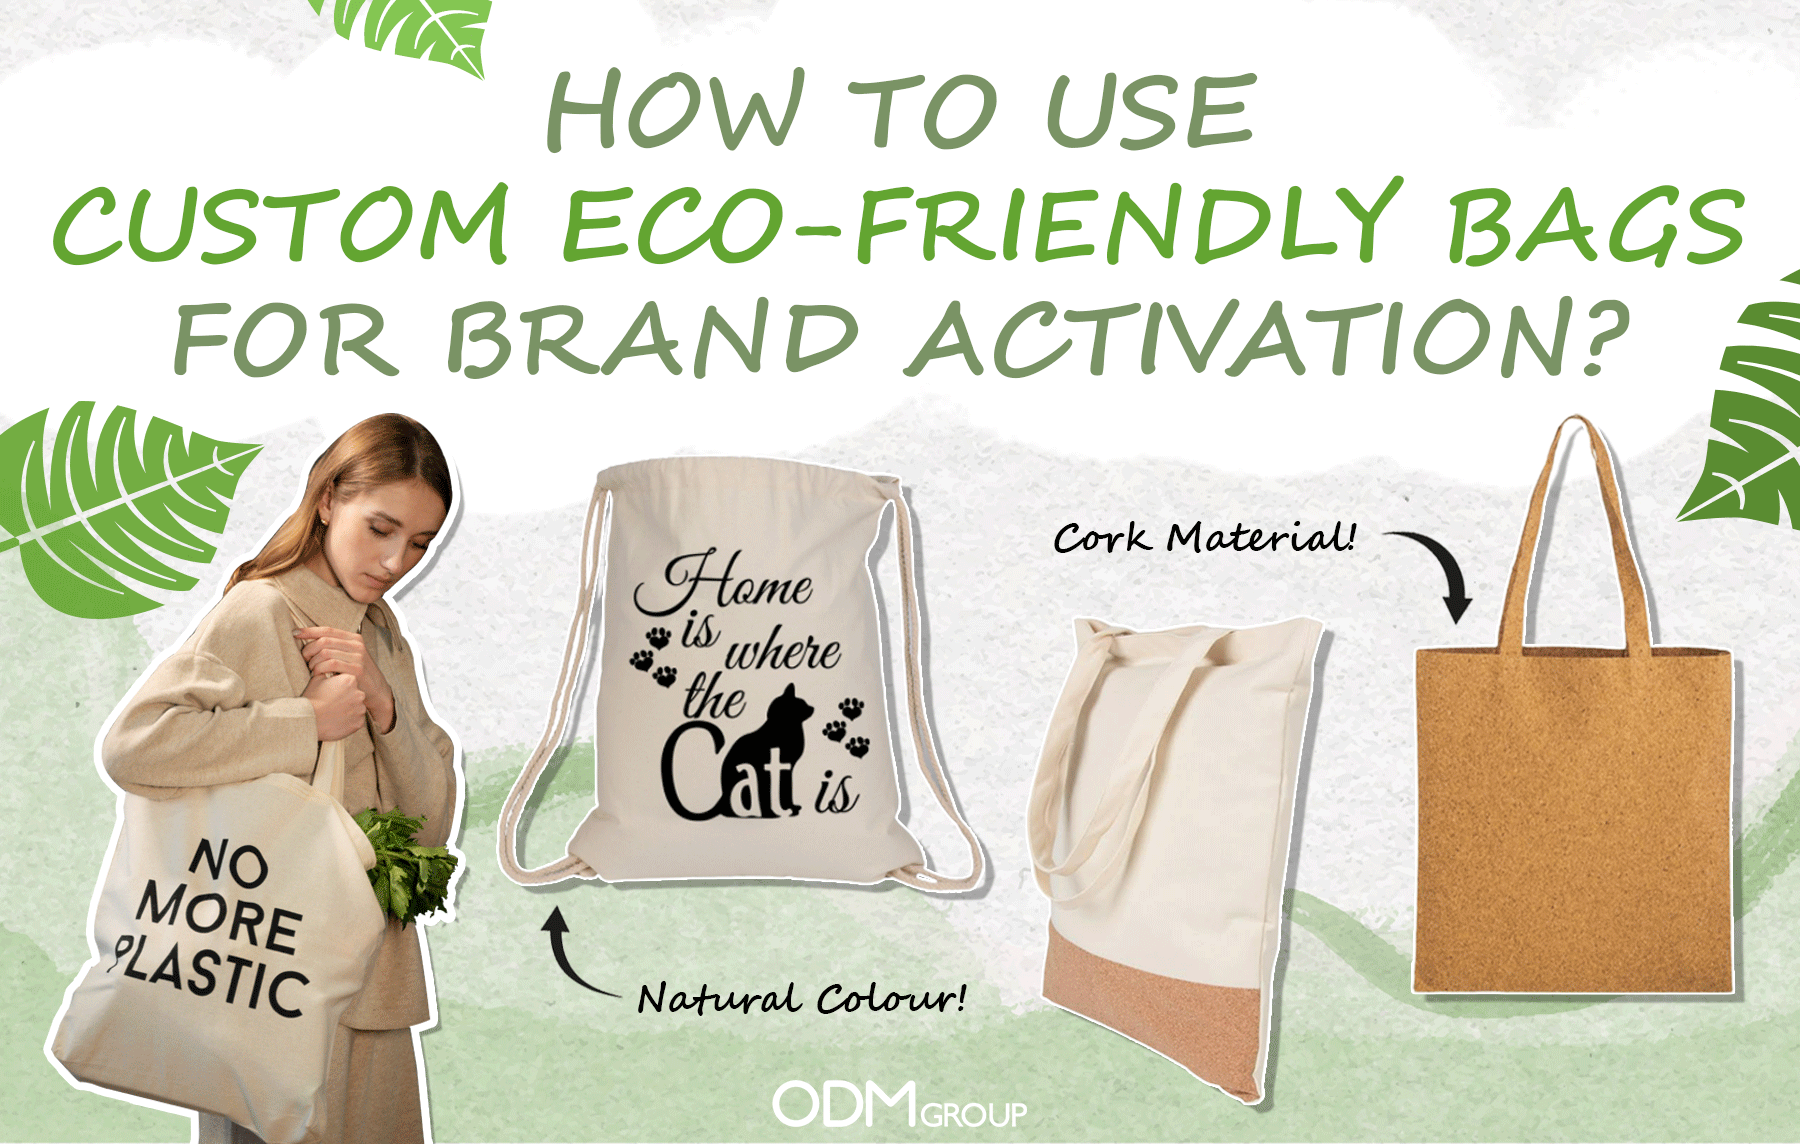 Customized Eco-Friendly Bags: Brand Activation Ideas